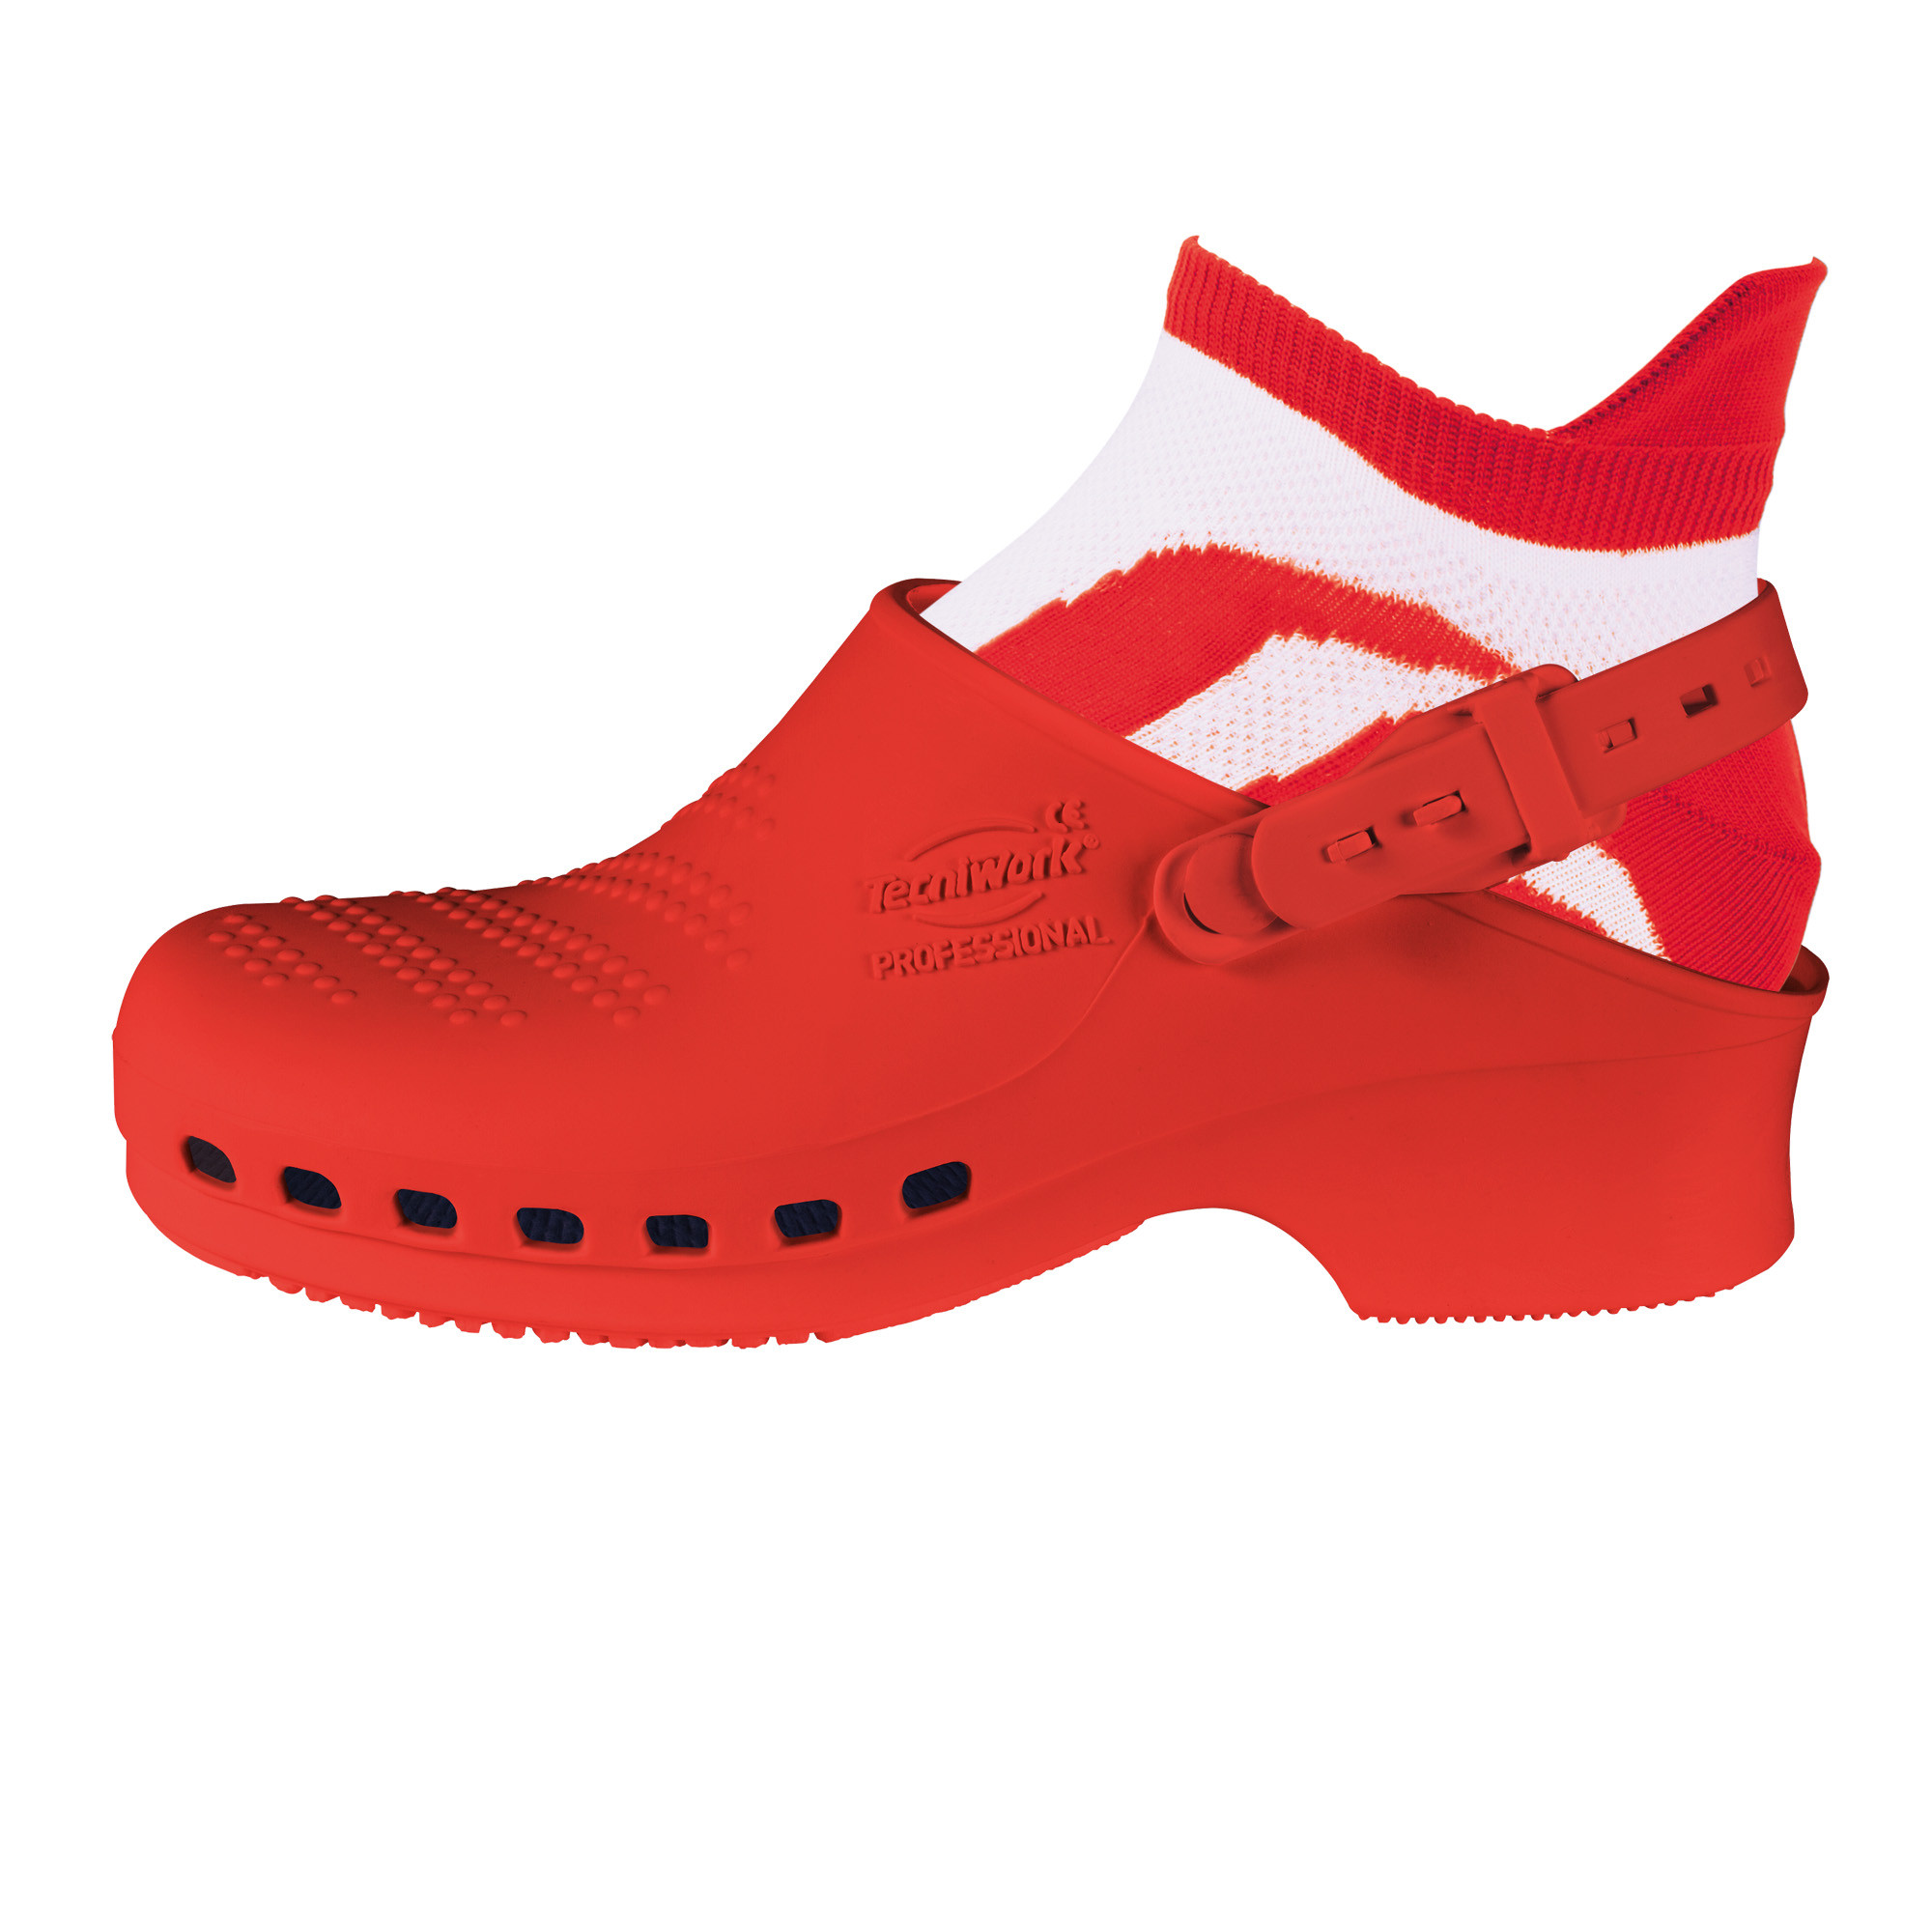 Professional sanitary clogs red Size 40/41